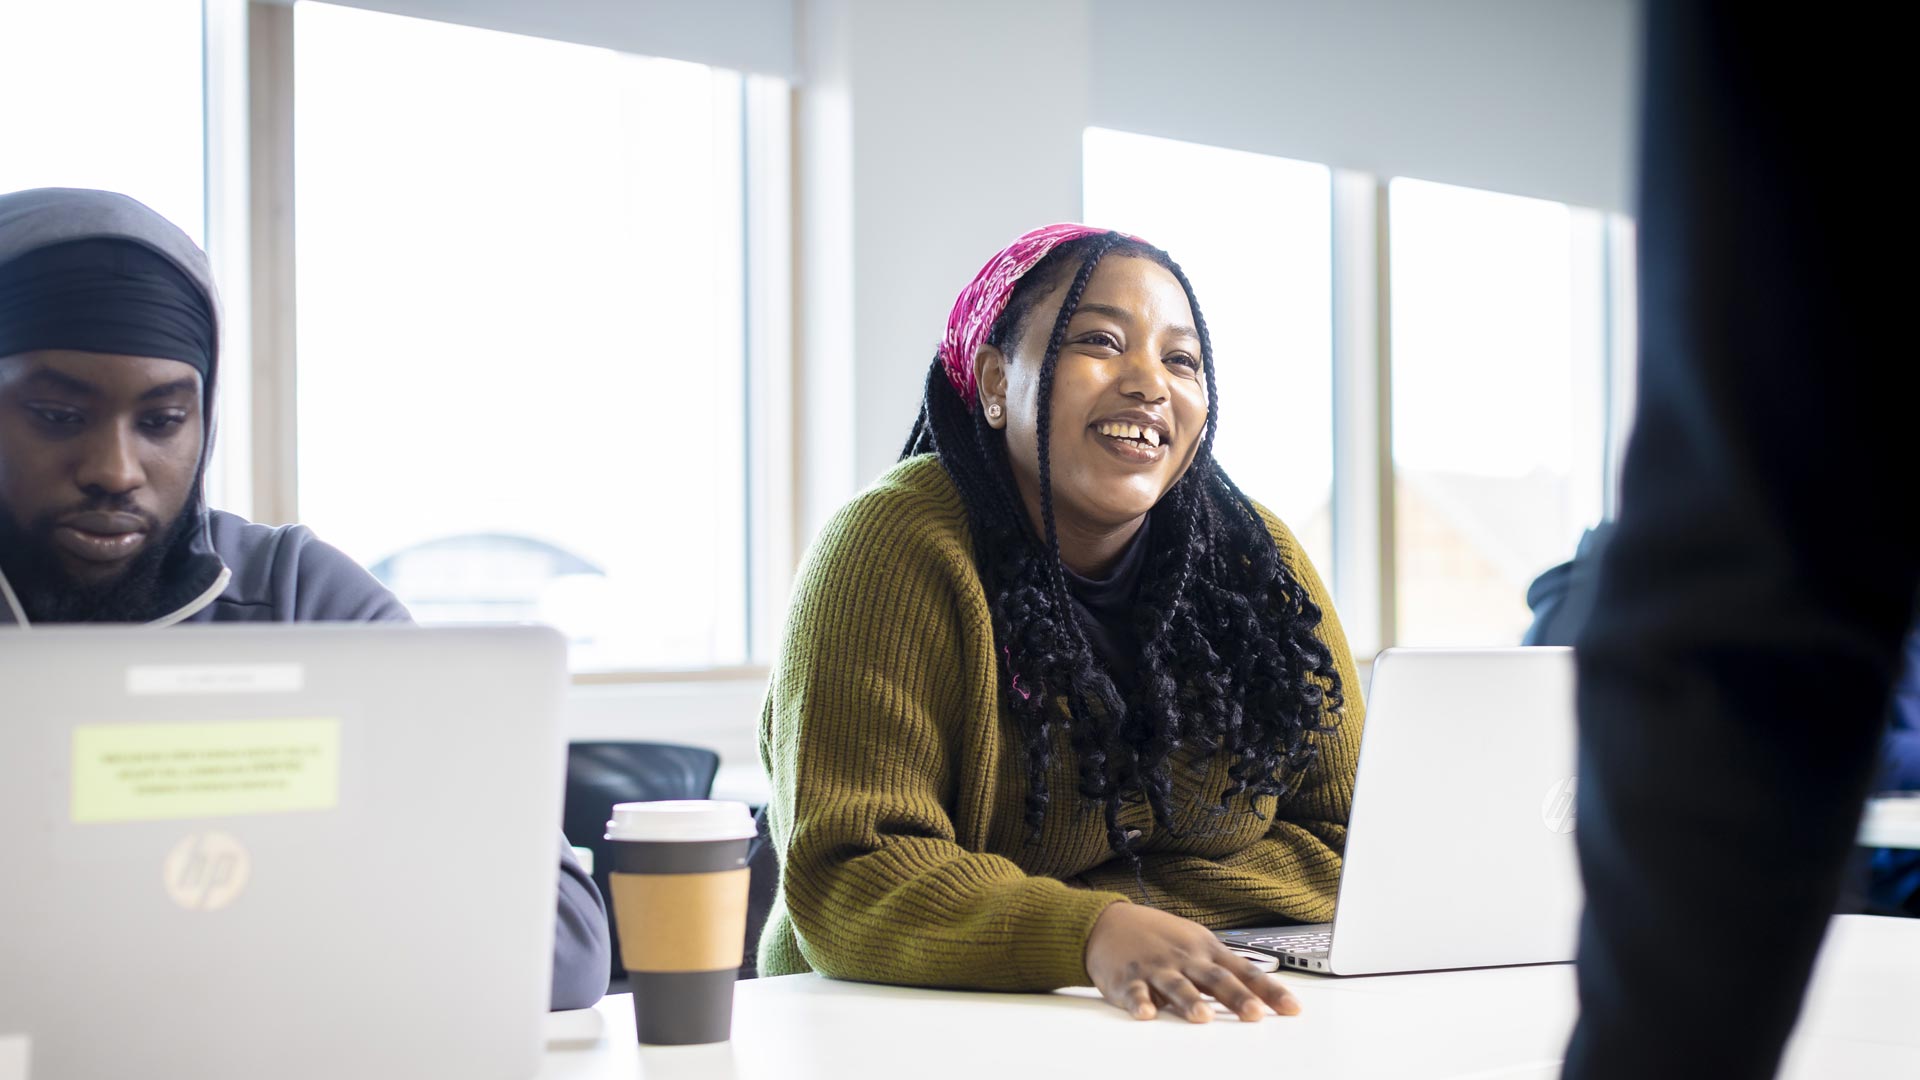 A marketing student smiling and looking up from her laptop.